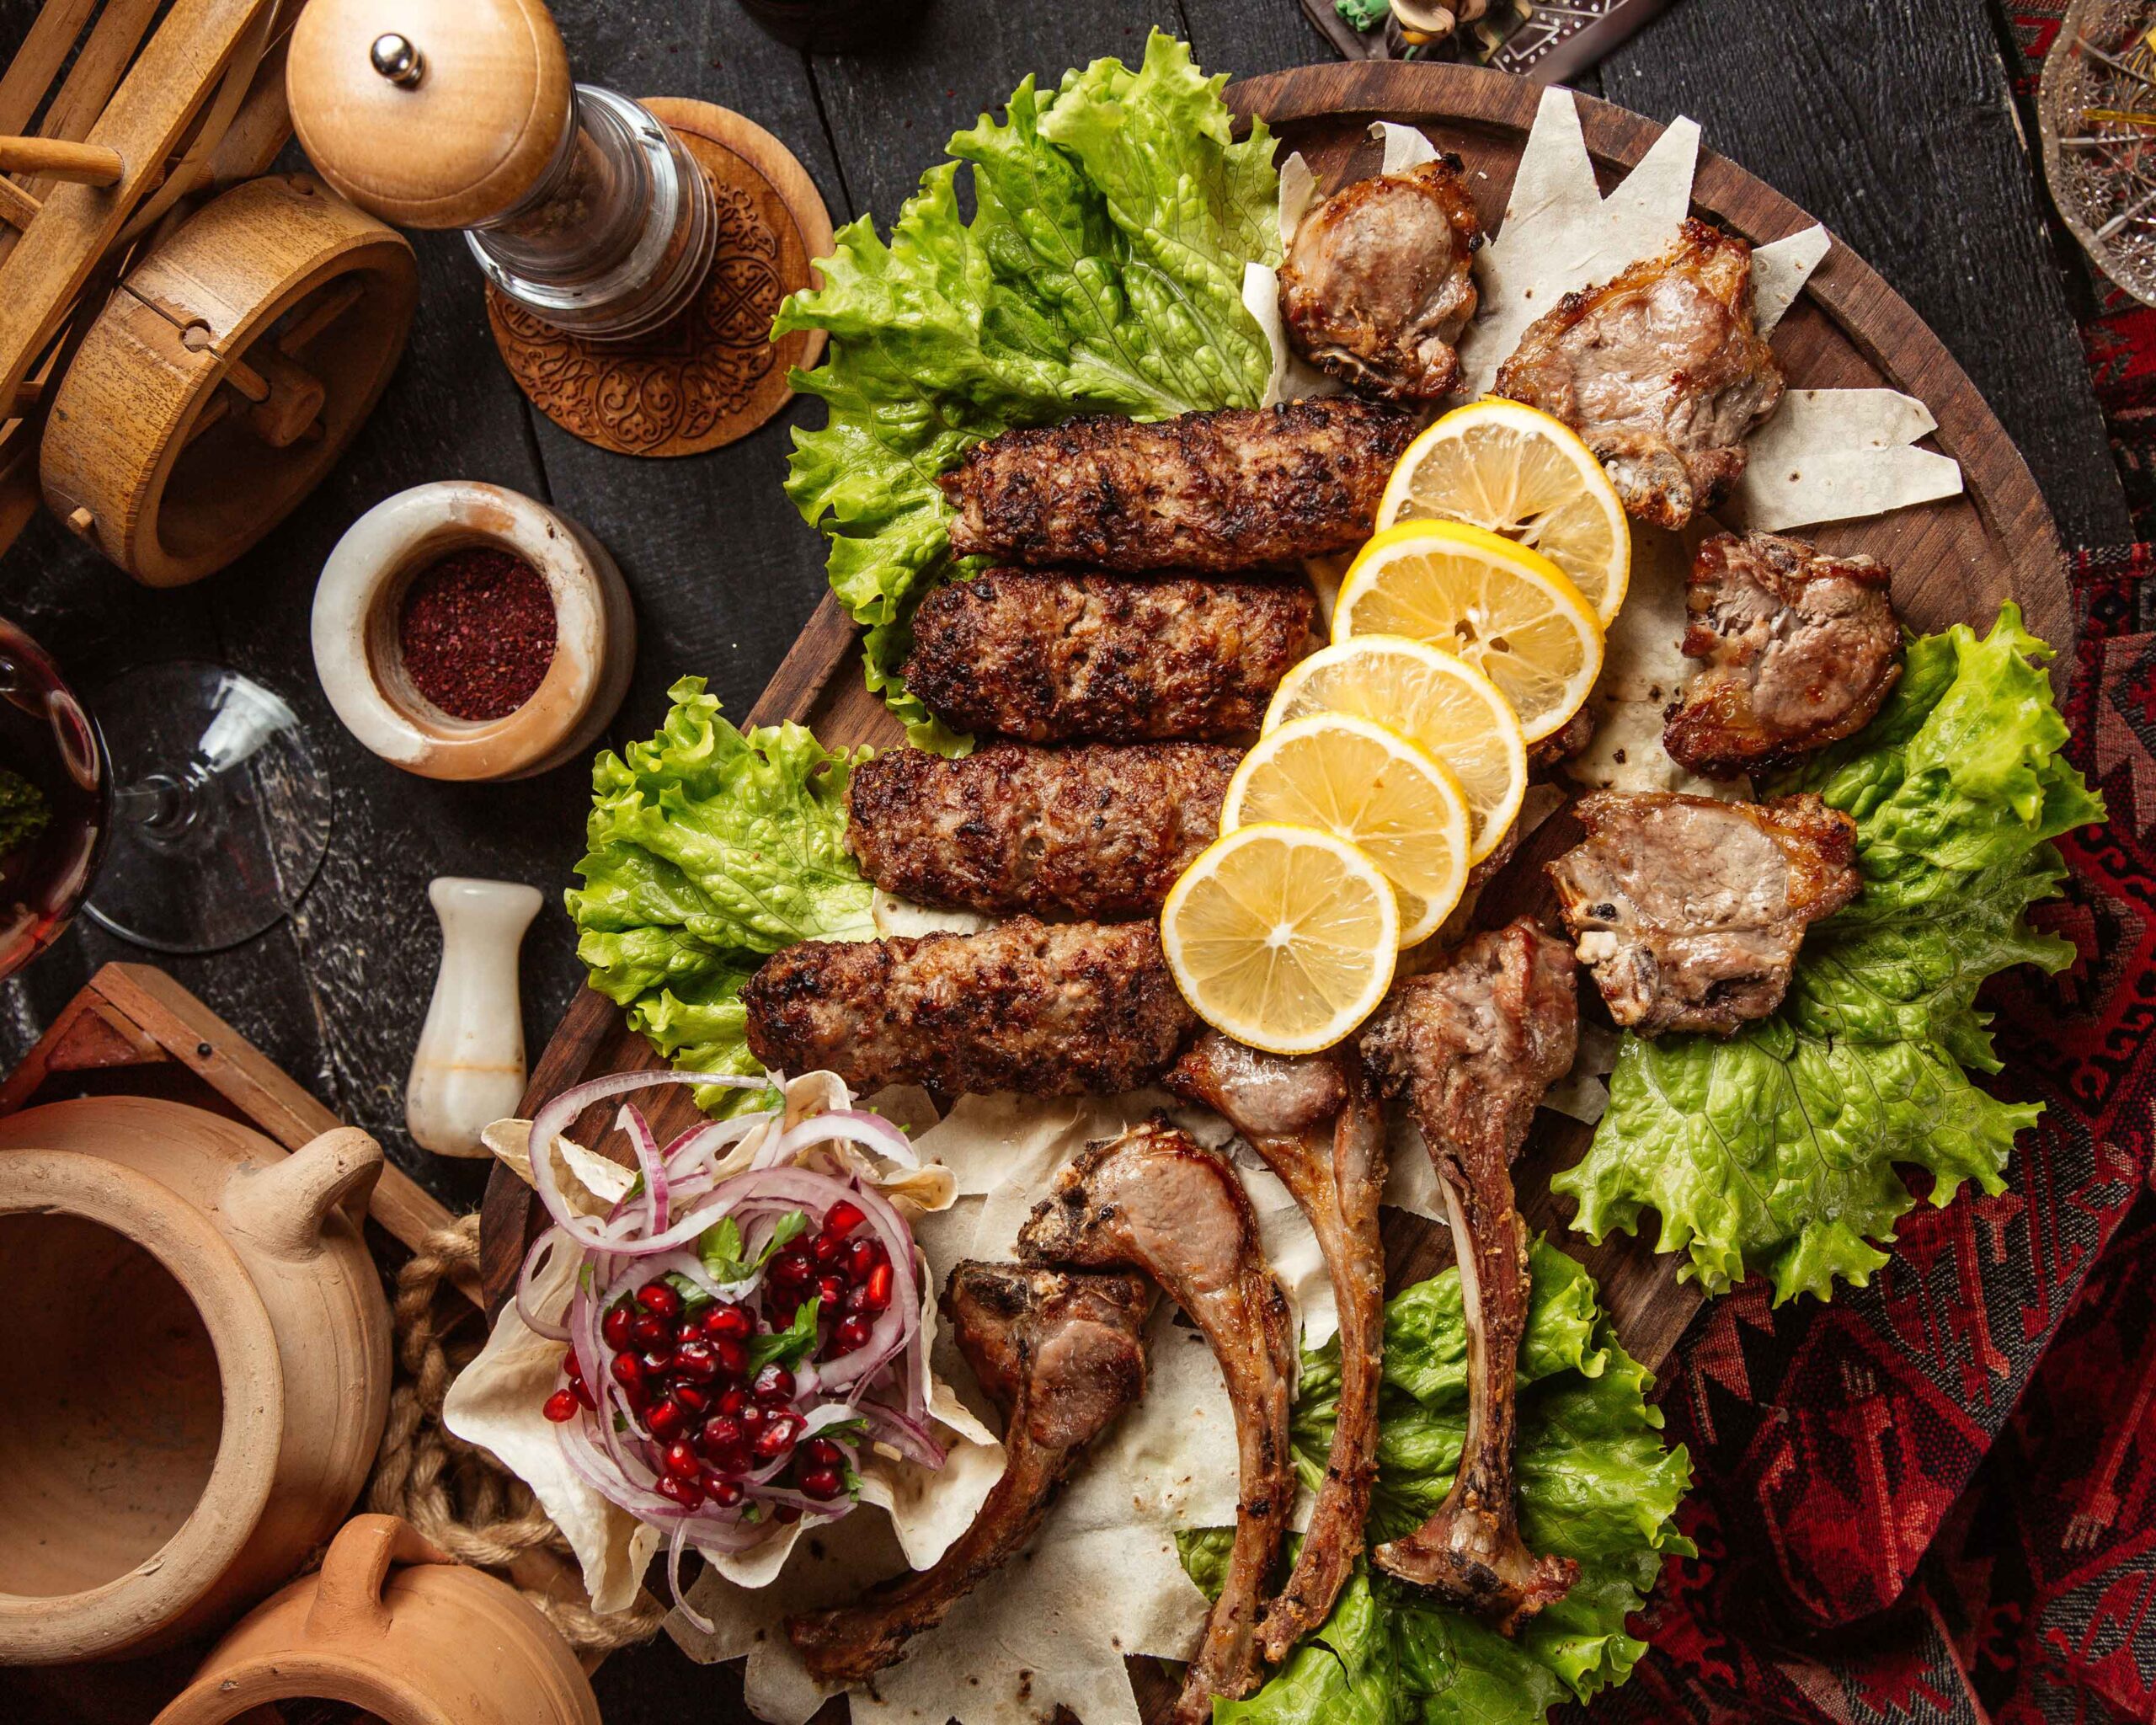 kebab-set-with-various-meat-pieces-lemon-slices